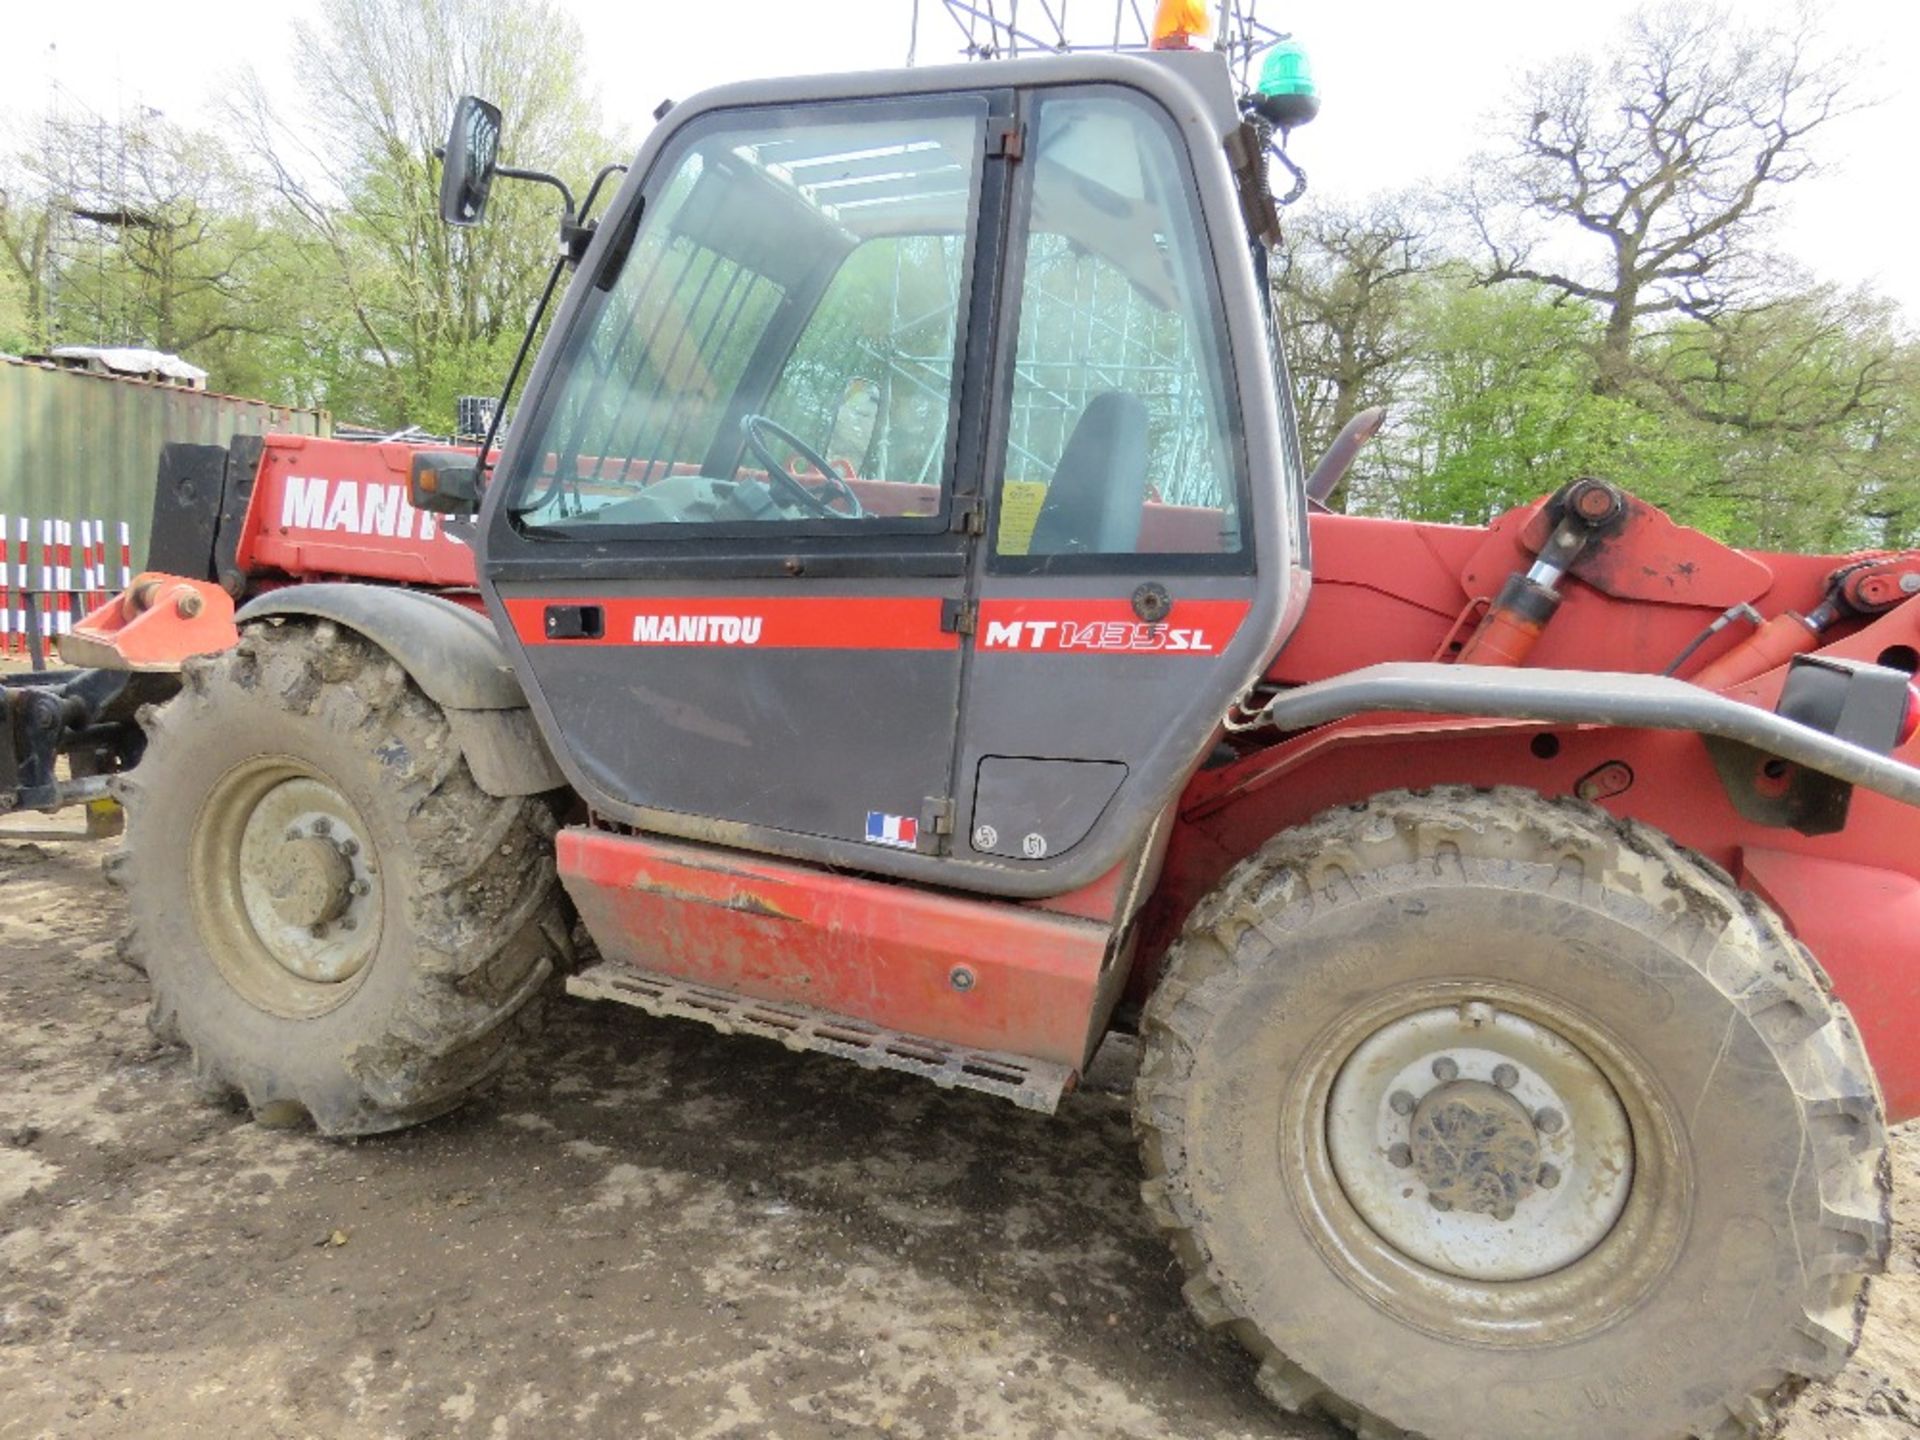 MANITOU 1435SL TELESCOPIC HANDLER REG:LU06 MRO (LOG BOOK TO APPLY FOR). 7965 REC HRS. YEAR 2006 BUIL - Image 5 of 14